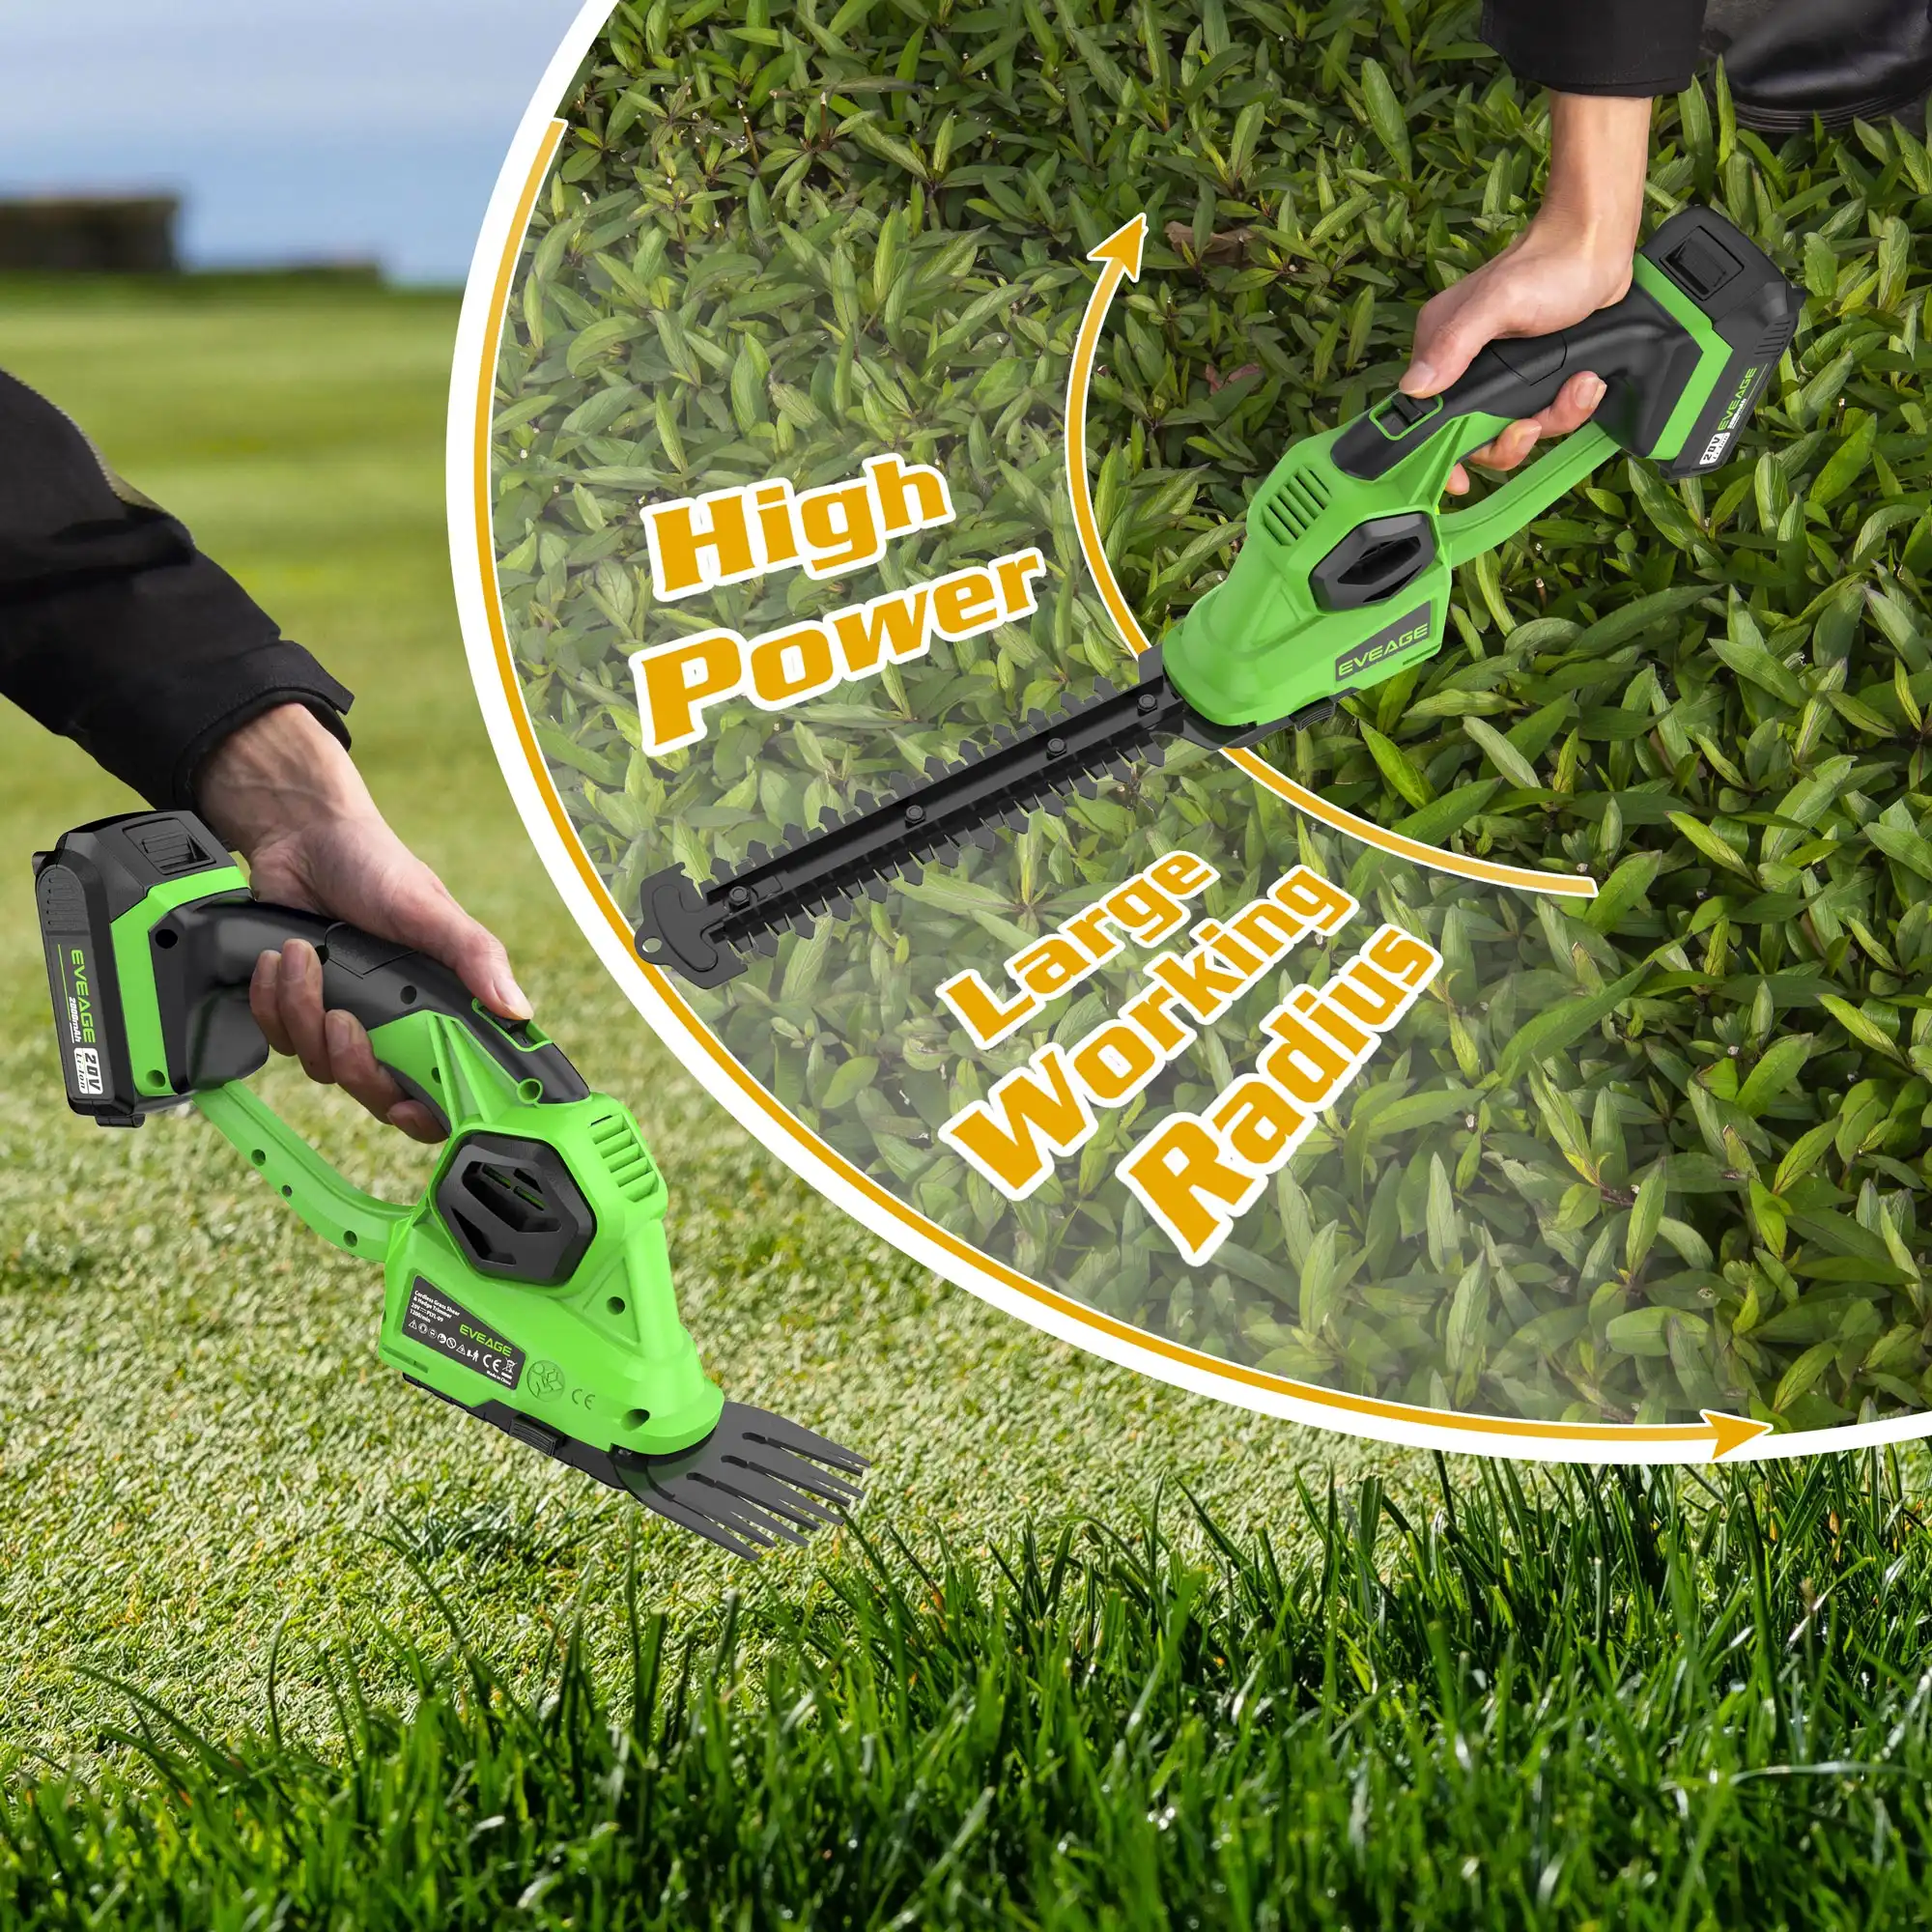 hand held electric grass trimmer